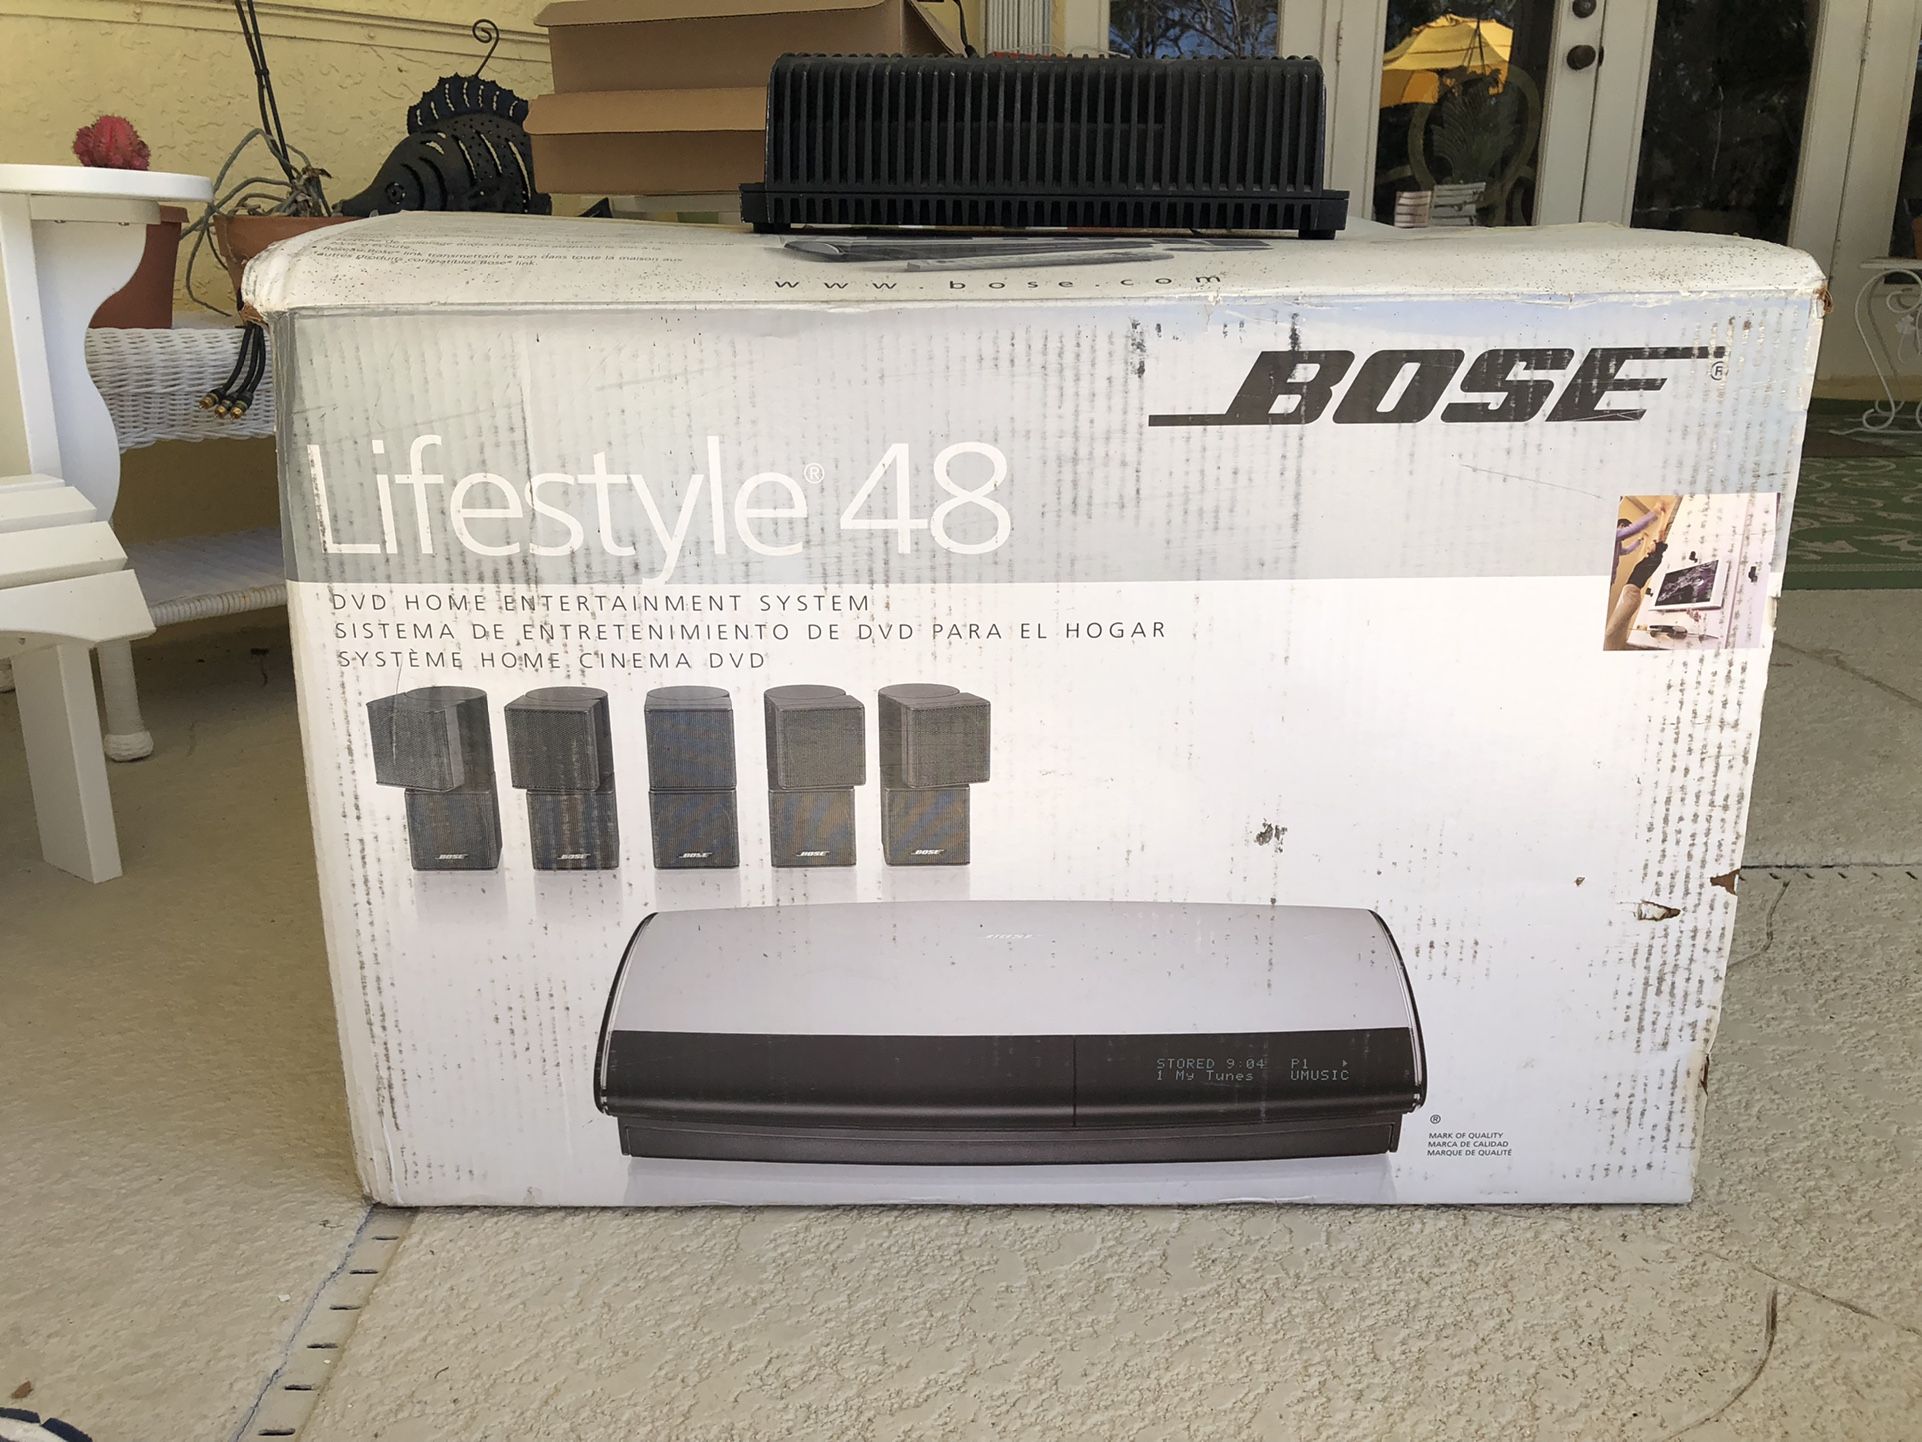 Bose Lifestyle 48 Home Entertainment System